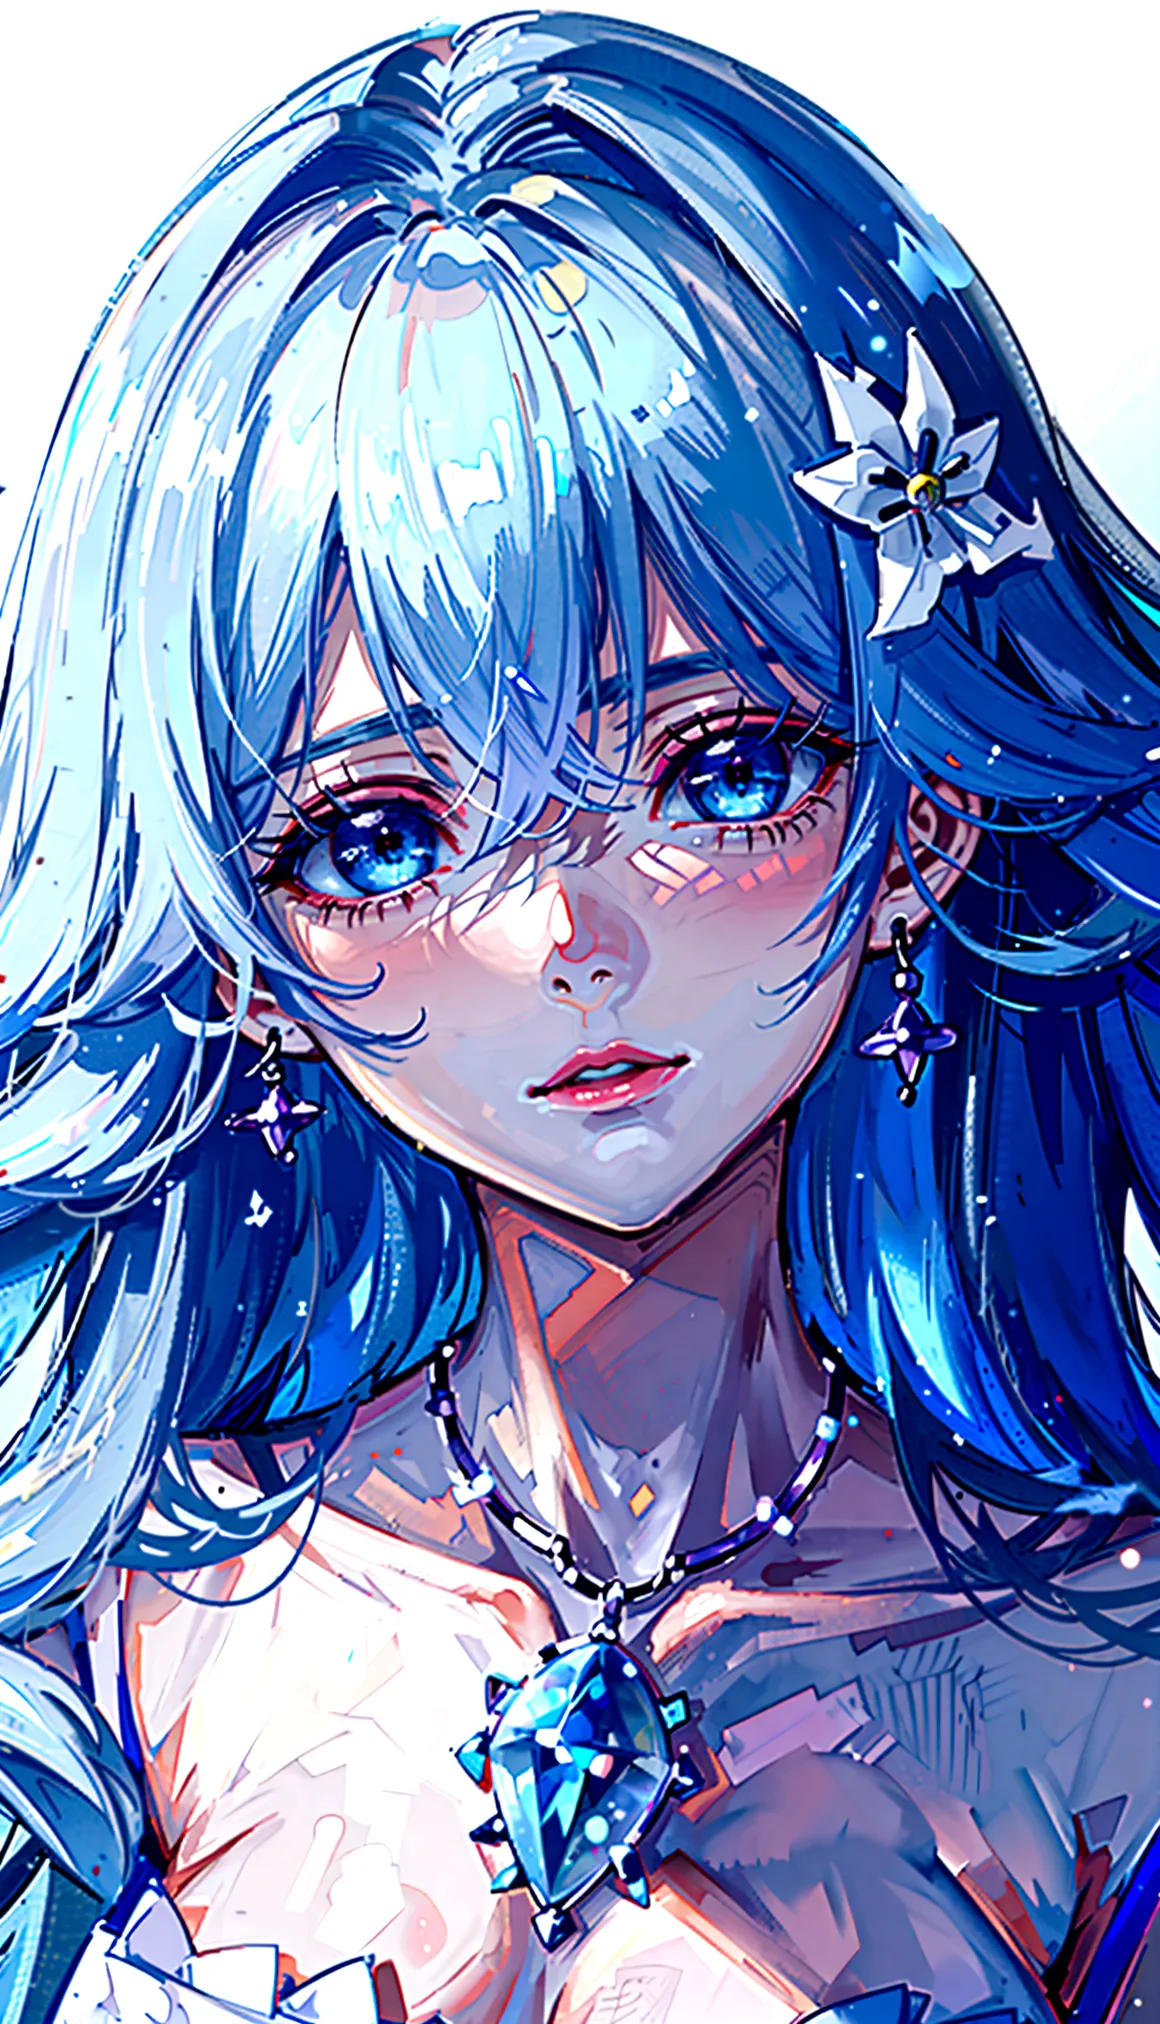 Anime girl with blue hair and blue eyes in a blue dress, Anime Style 4k, Beautiful anime portraits, Beautiful blue hair girl, An...